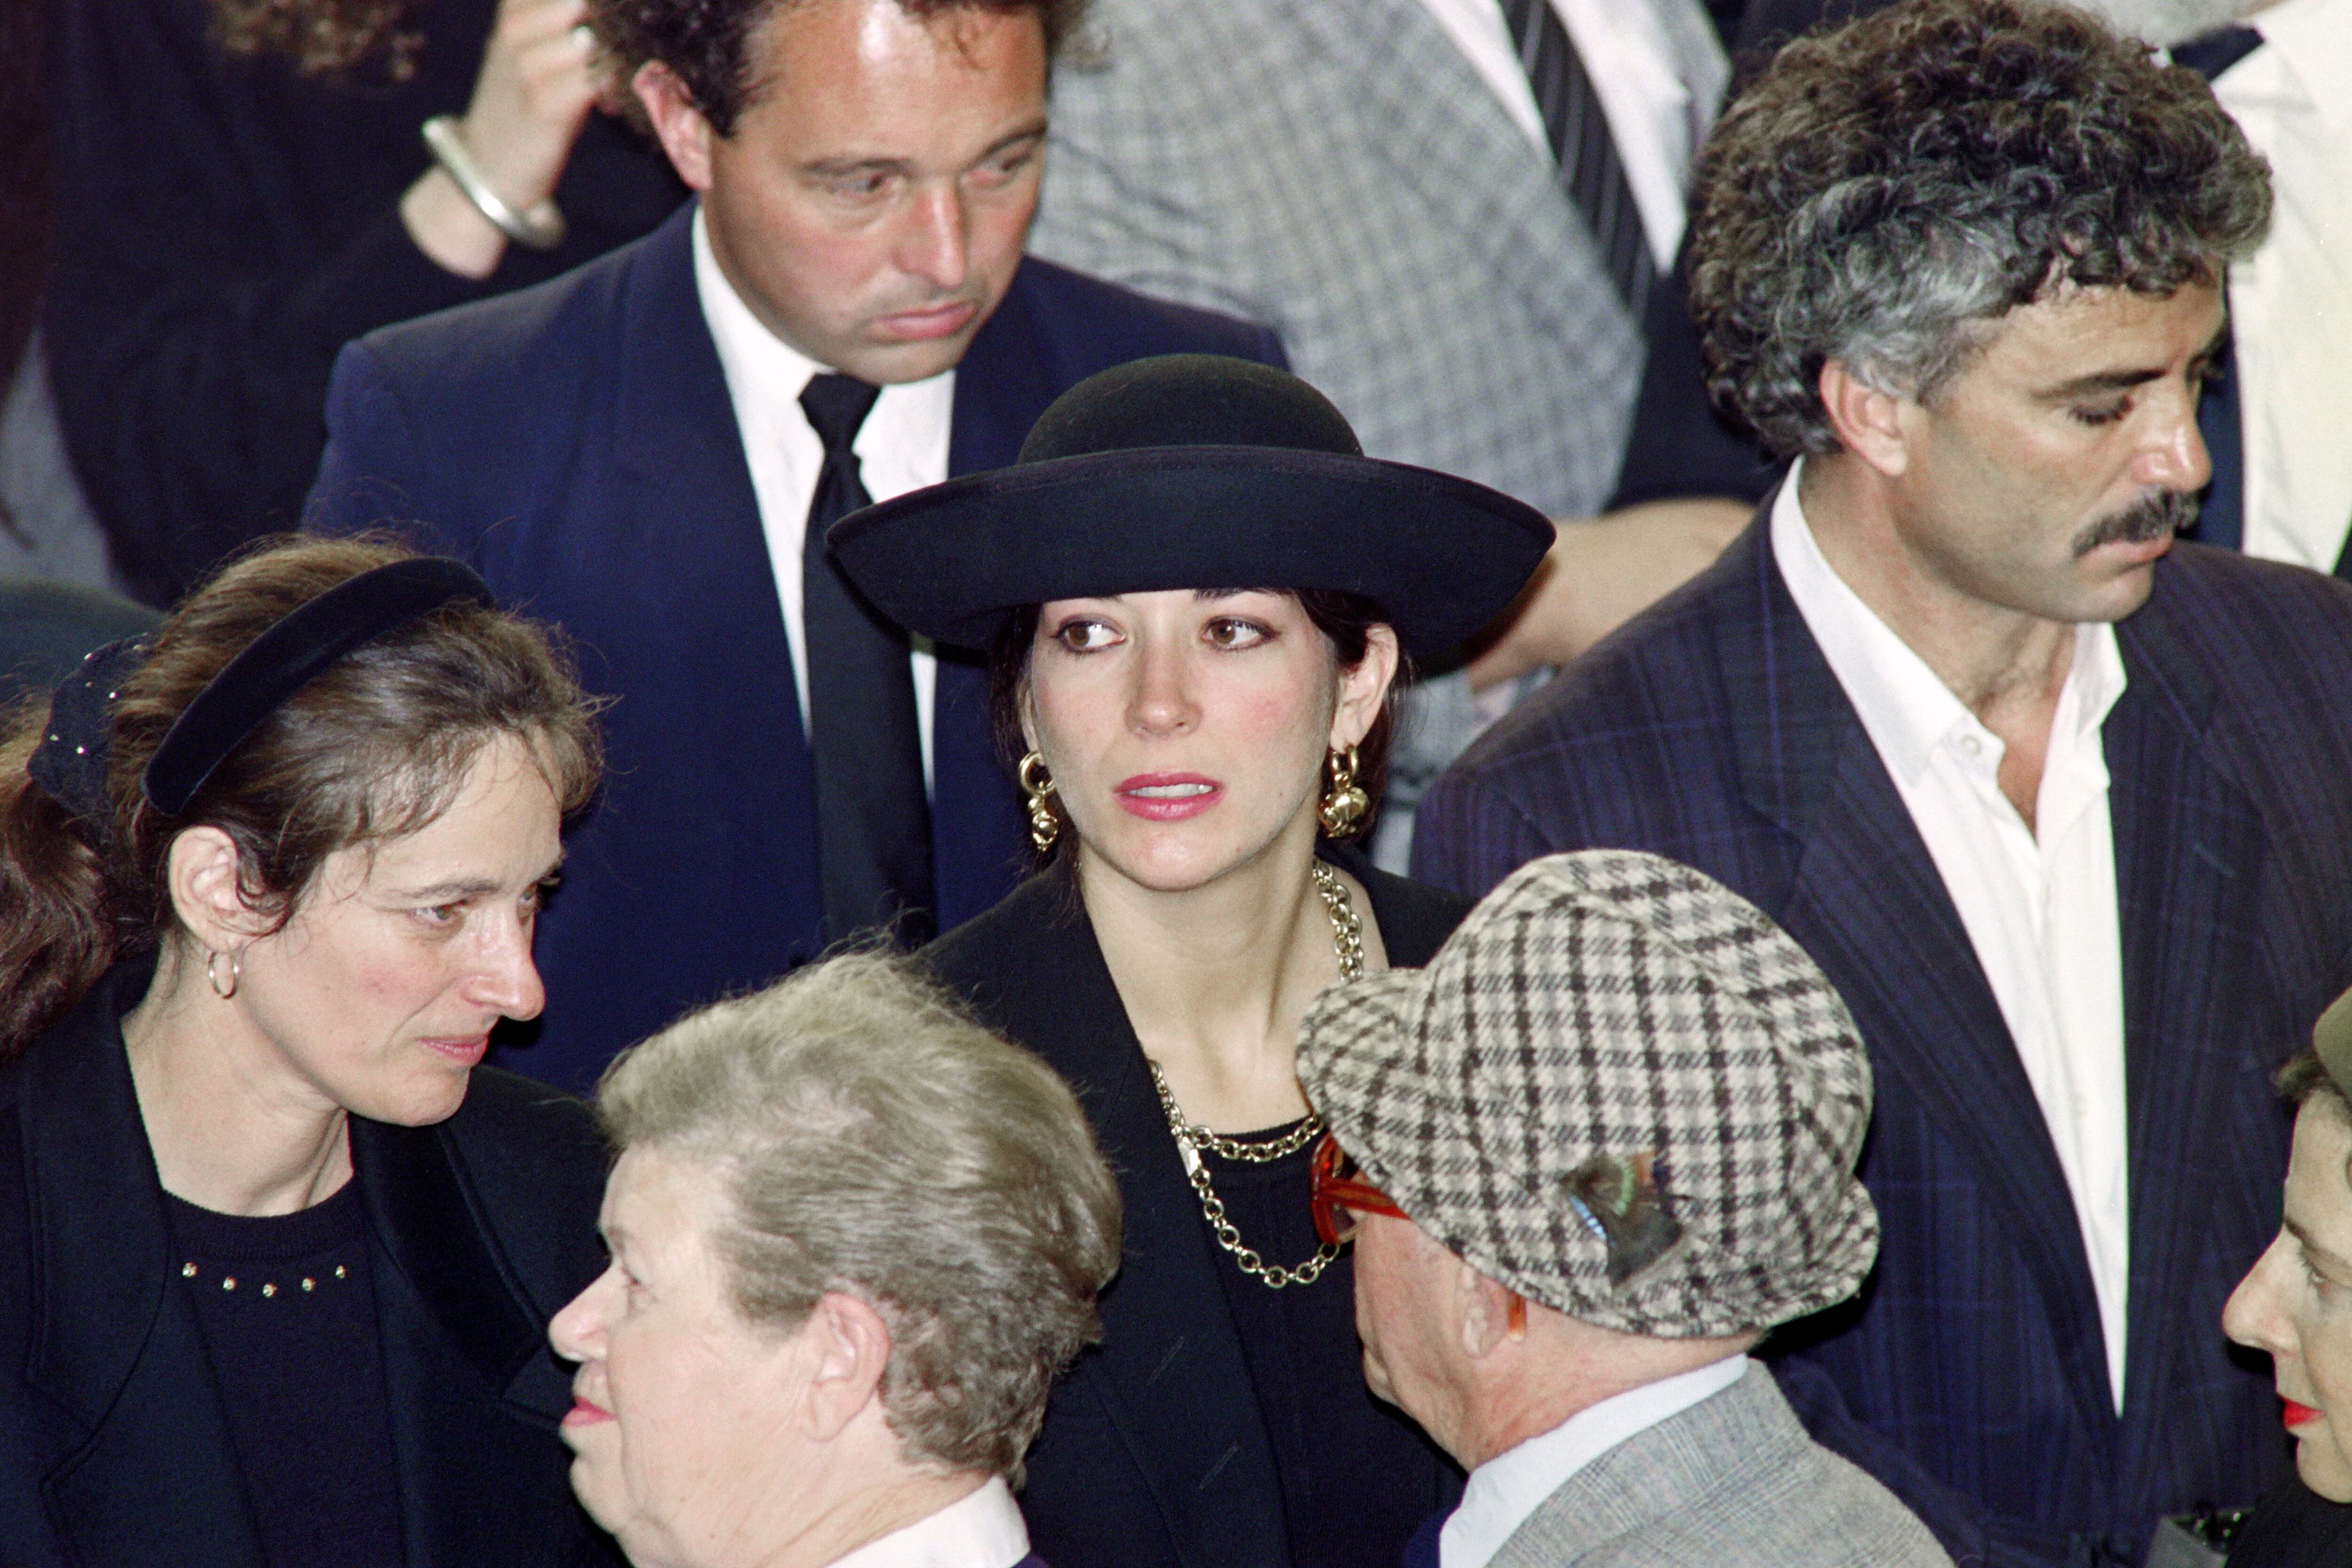 In this file photo taken on November 10, 1991, Ghislaine Maxwell (center) attends her father's funeral service.  (Sven NACKSTRAND / AFP).